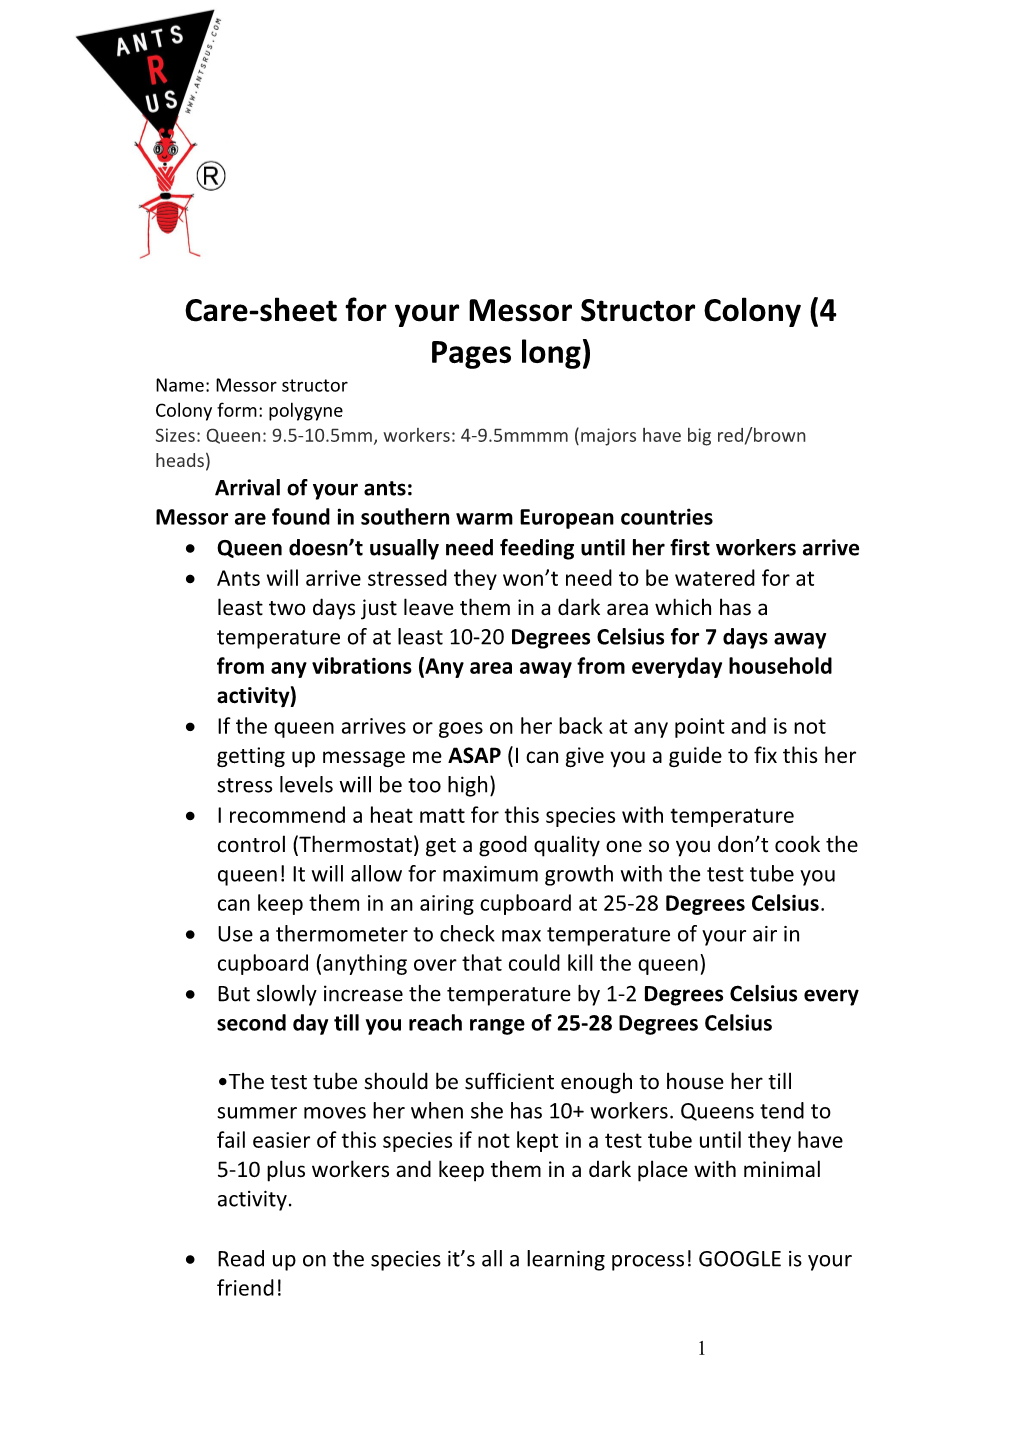 Care-Sheet for Your Messor Structor Colony (4 Pages Long)